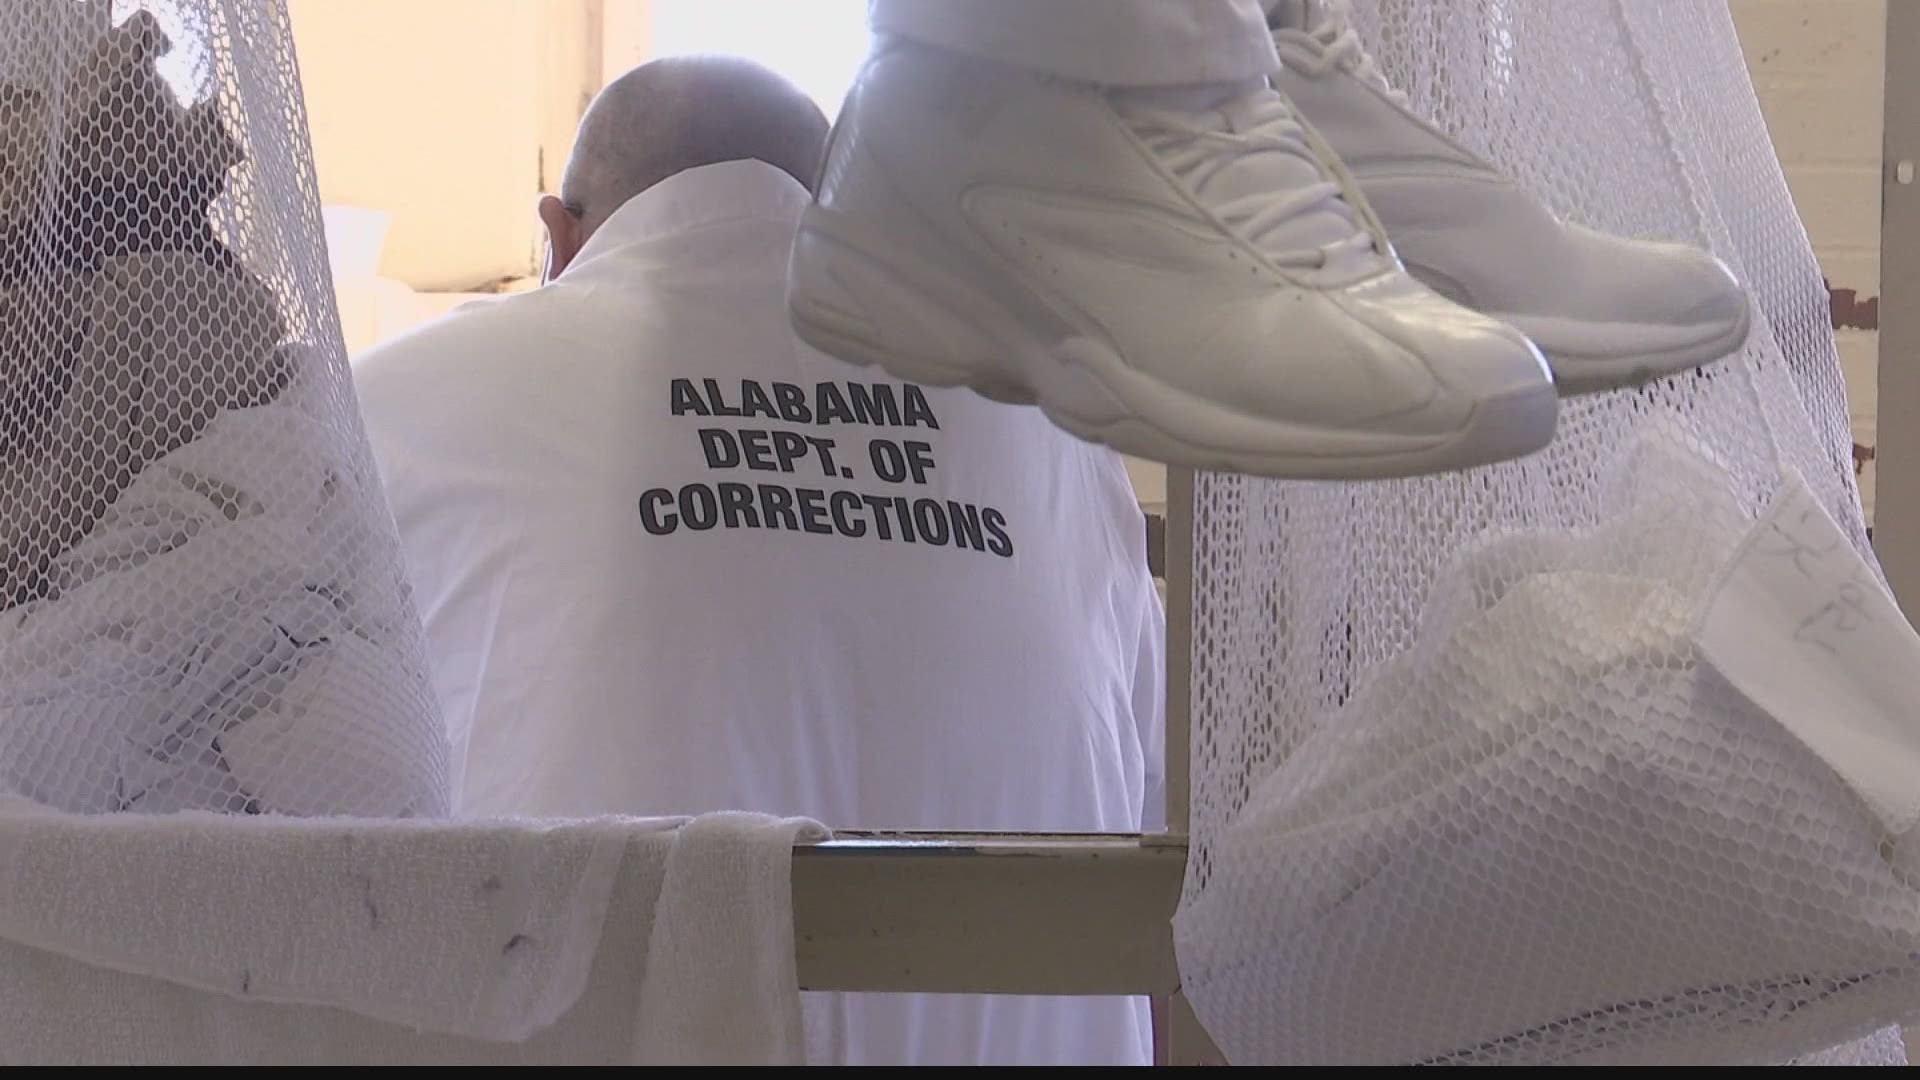 The lawsuit alleges the State fails to provide adequate protection from prisoner-on-prisoner violence and sexual abuse, among other accusations.